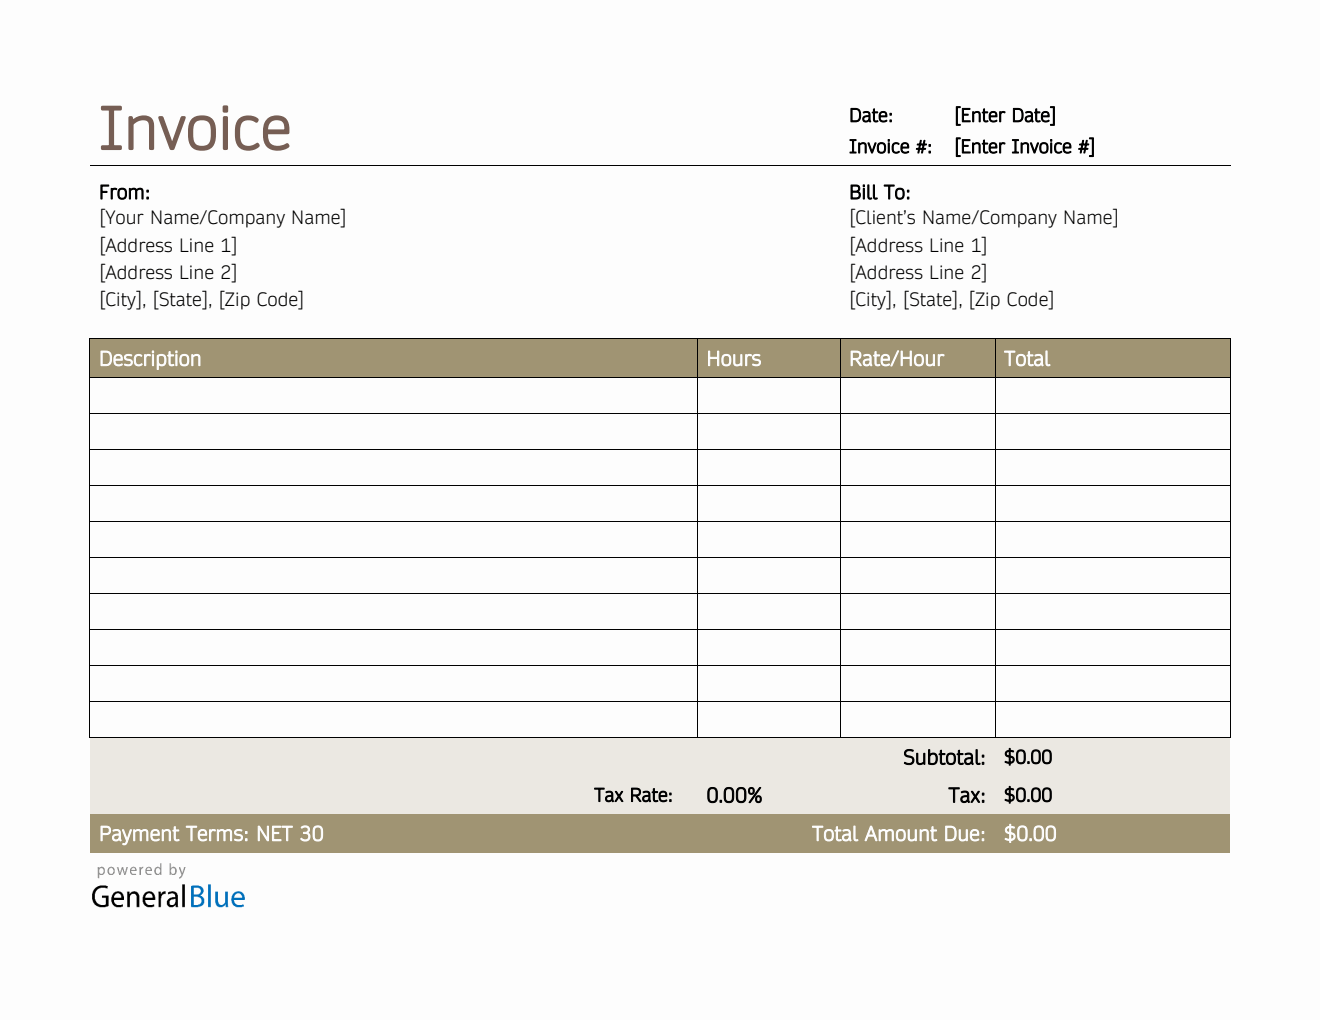 Freelance Hourly Invoice with Tax Calculation in Word (Simple)